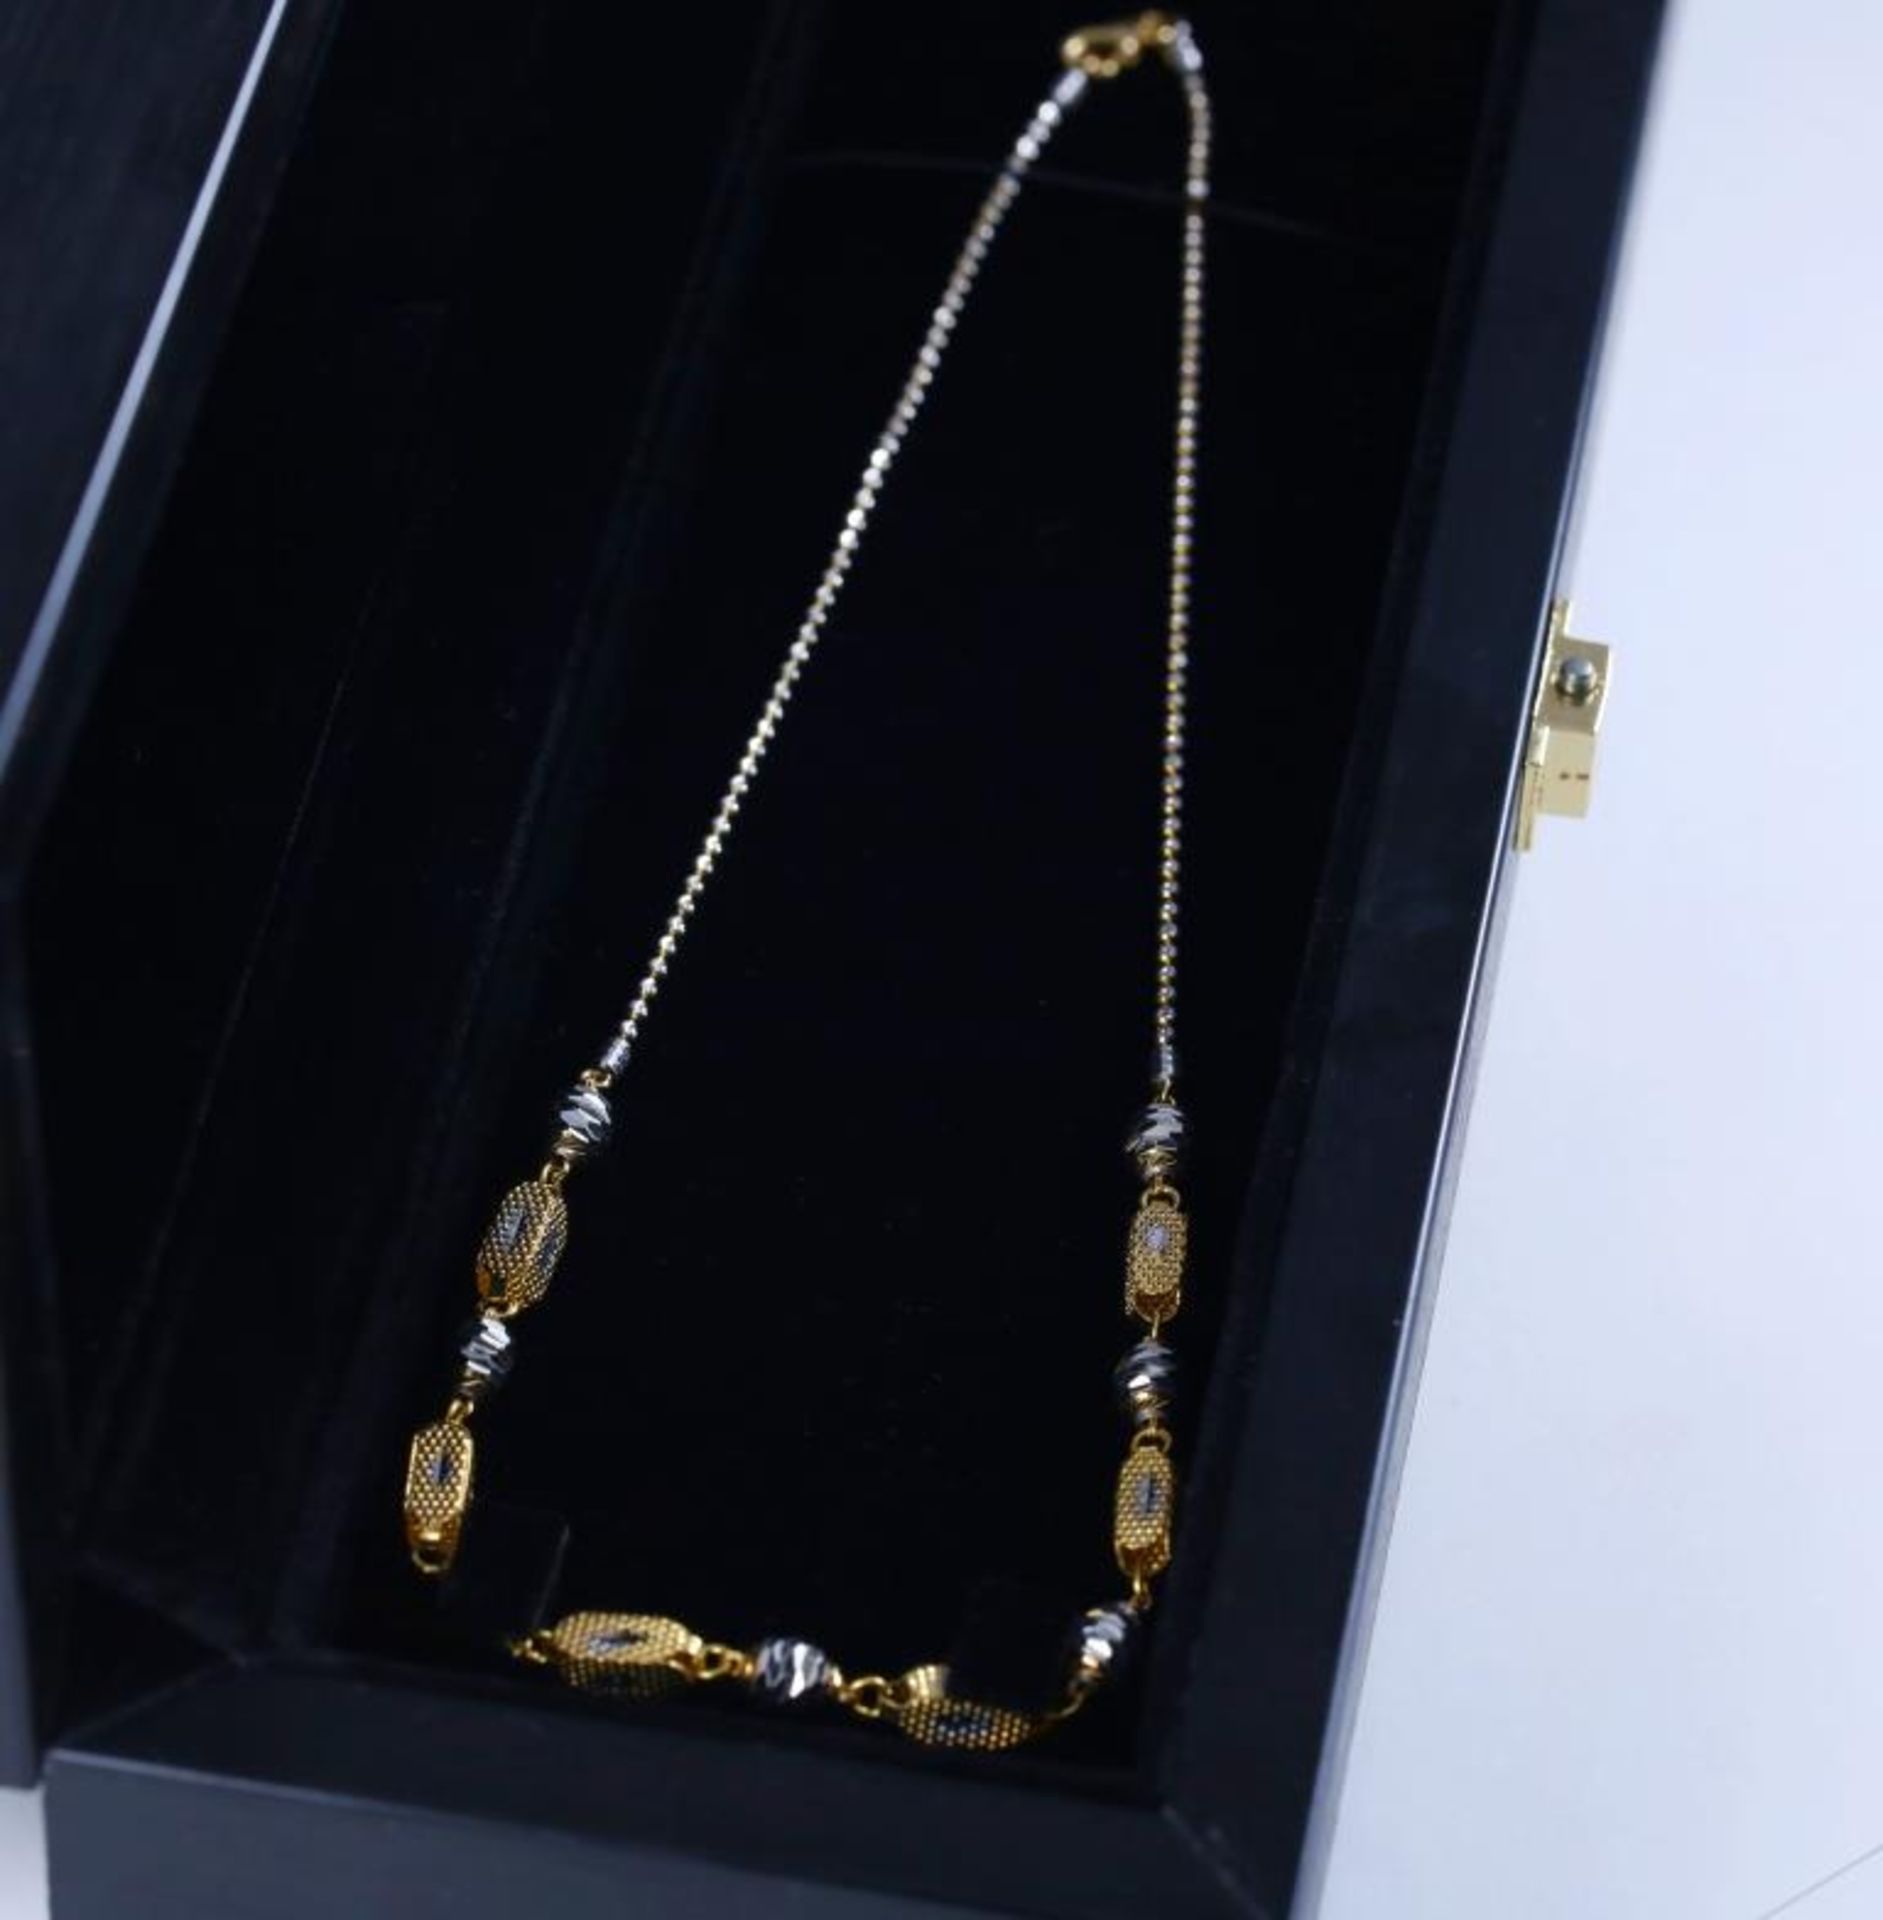 18 K / 750 Hallmarked Yellow and White Gold Chain Necklace - Image 2 of 4